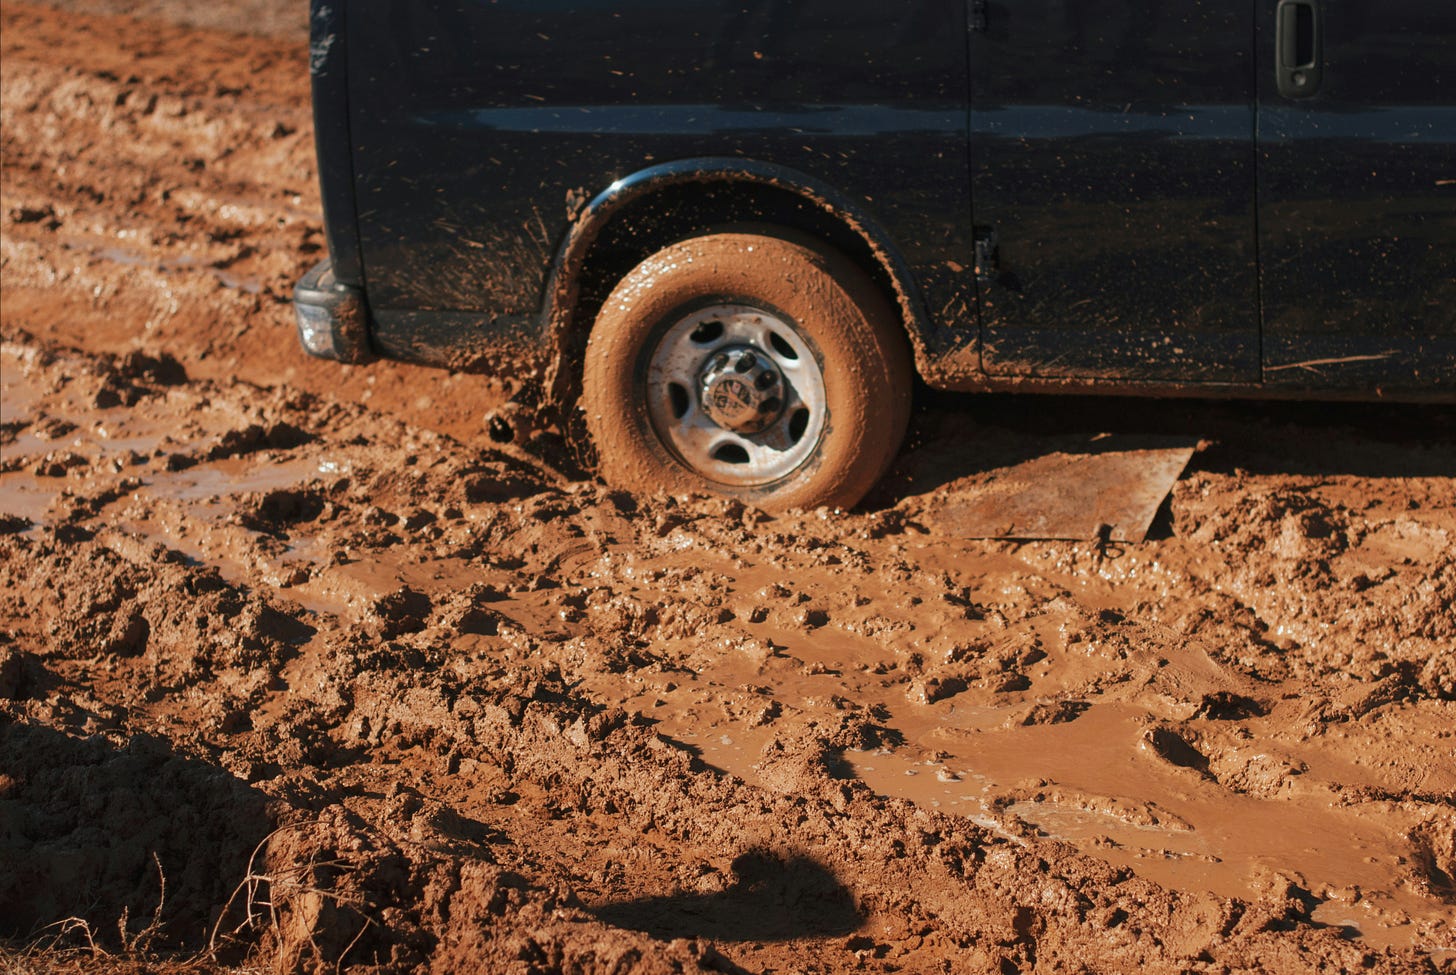 The rear right wheel of a van is centered in the frame, which is mostly red-brown mud, trapping the wheel of the van.